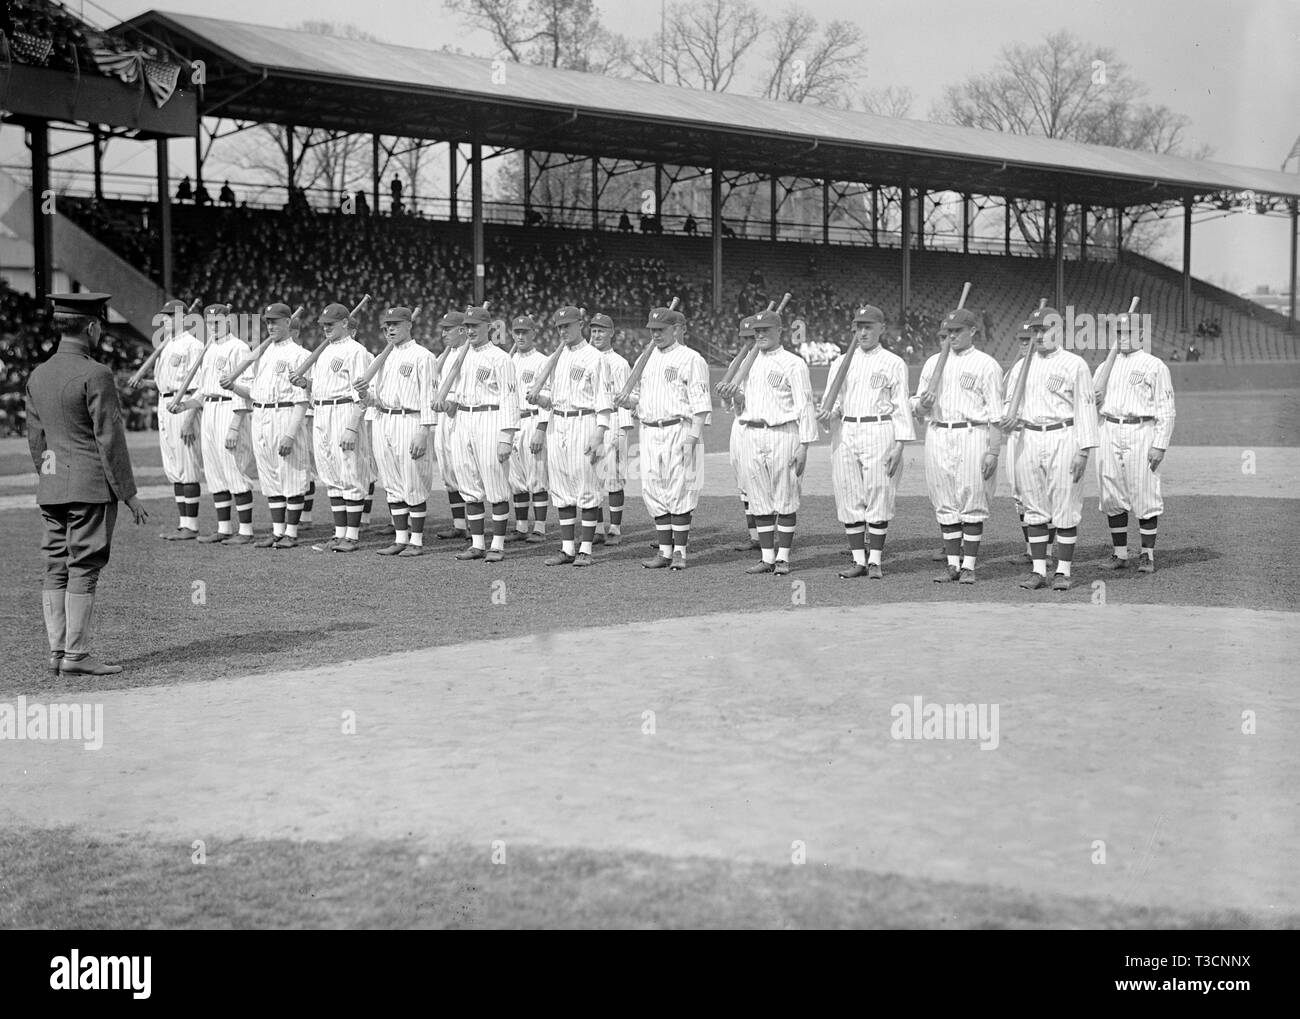 1920s baseball team Black and White Stock Photos & Images - Alamy